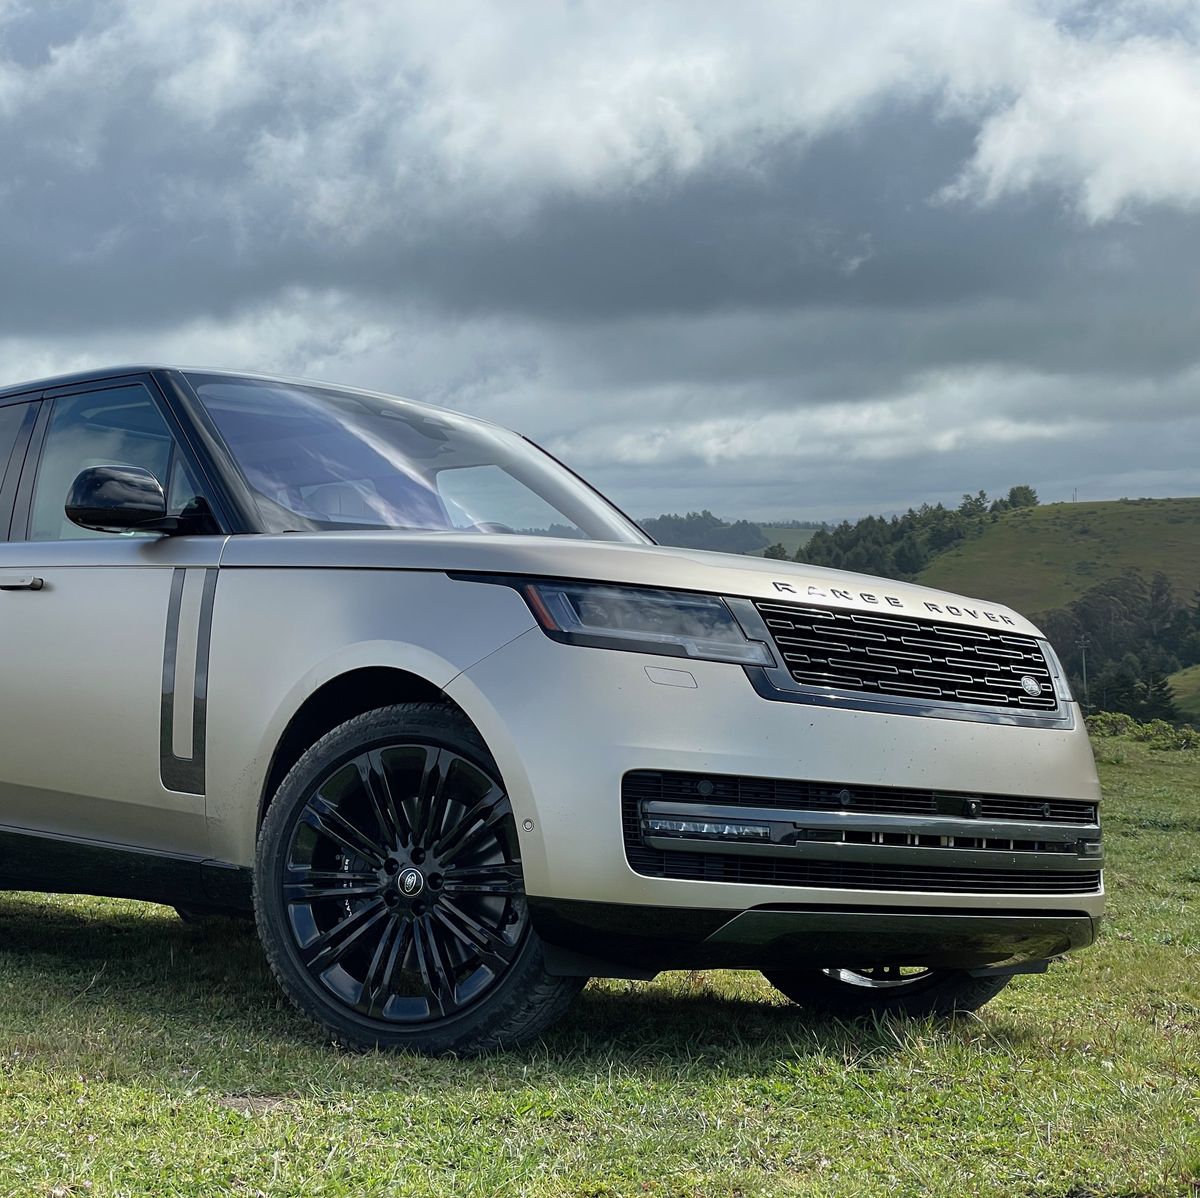 2022 Land Rover Range Rover Review: An Improved Transporter of Gods